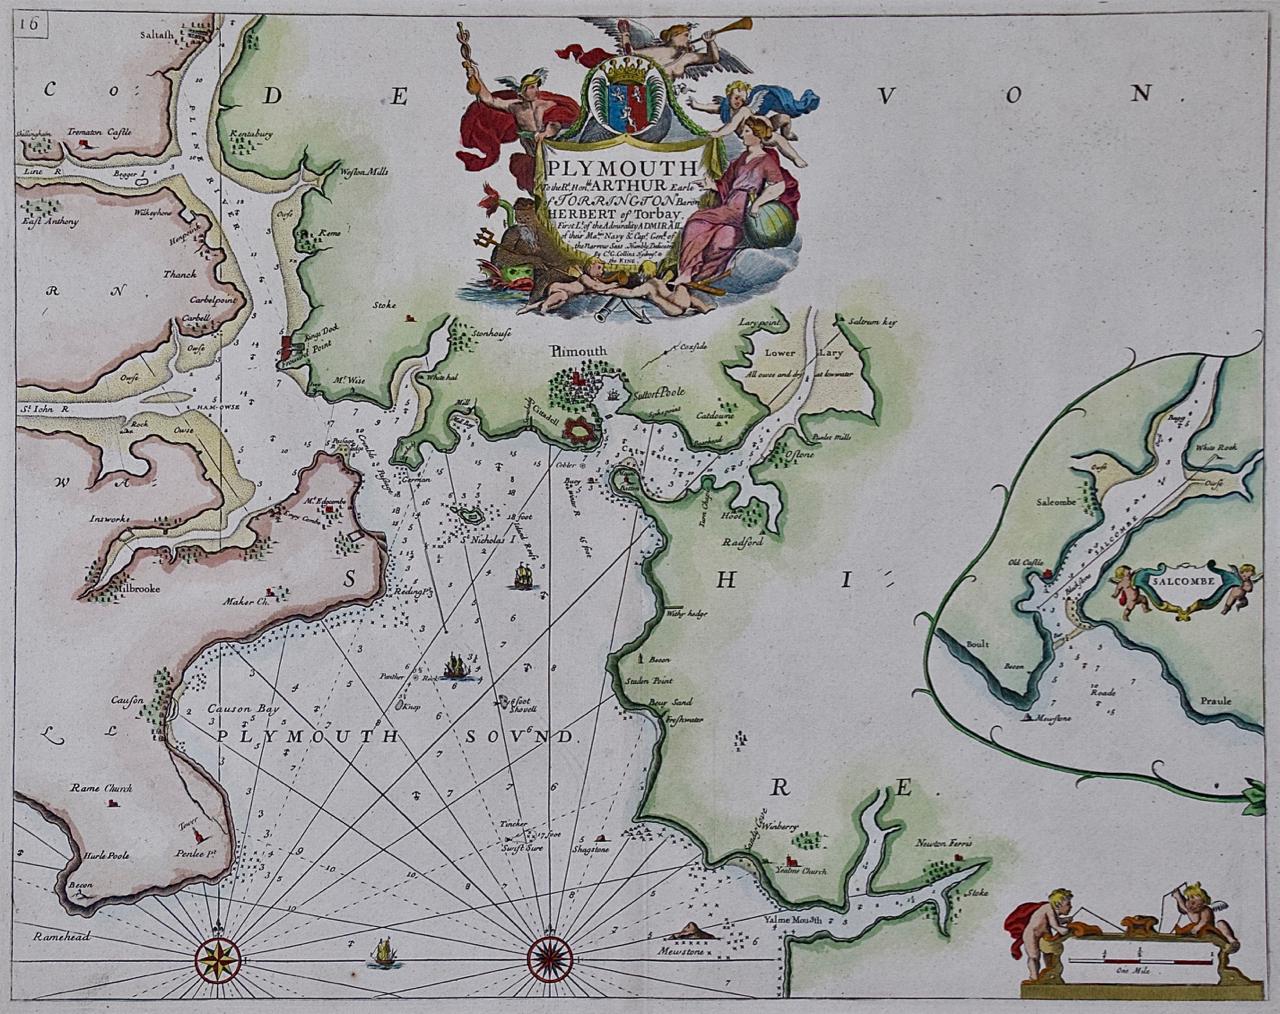 This hand-colored sea chart of the area around Plymouth, England from 